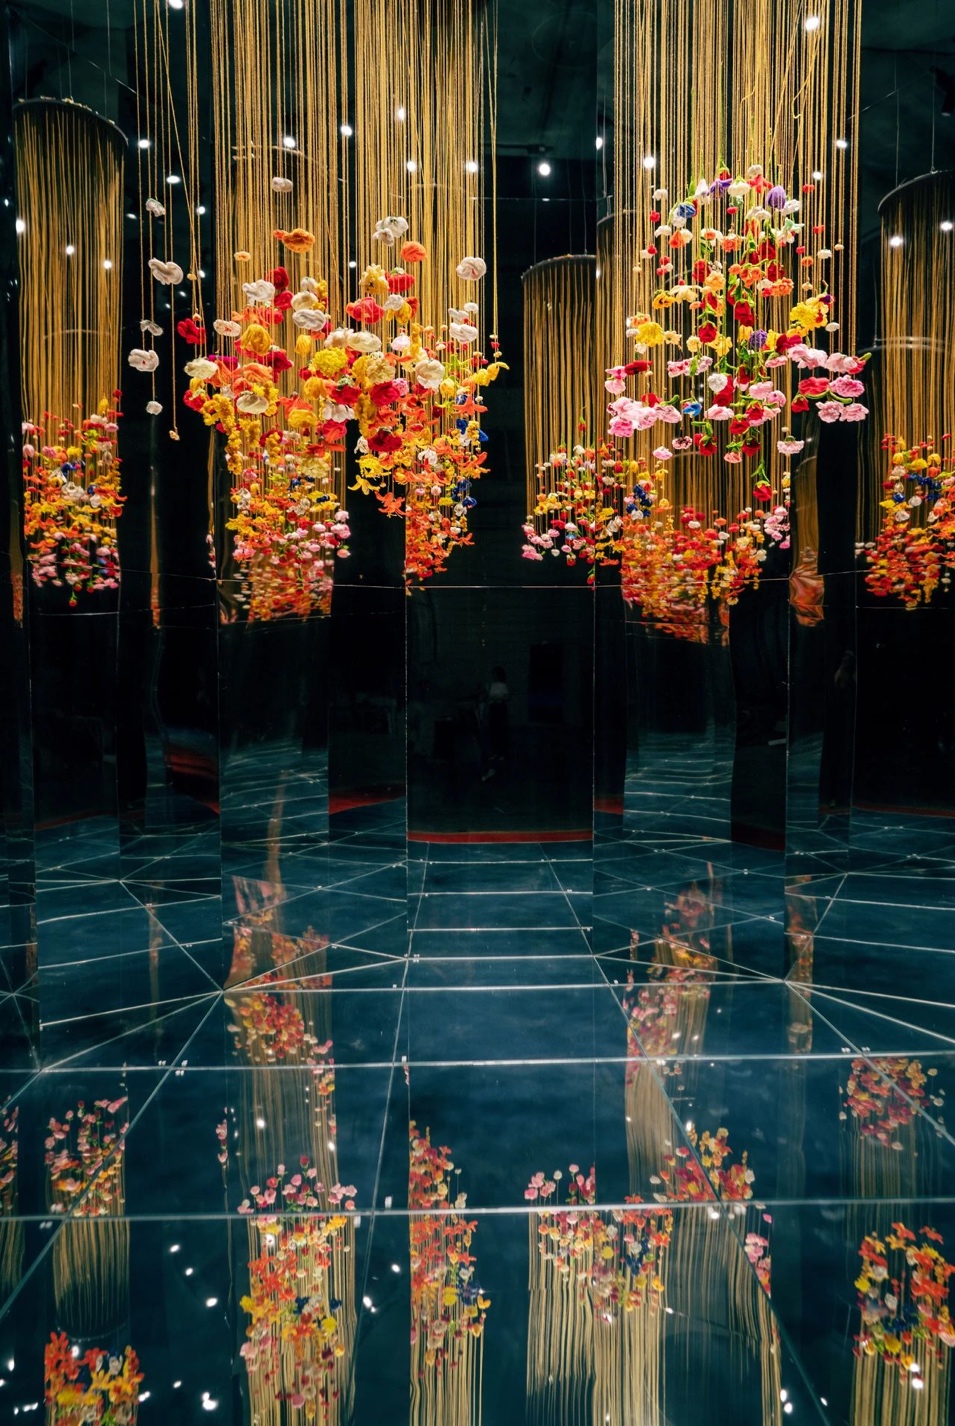 Chinese Design: Colourful dangling lights with flowers which reflect on the blue ground